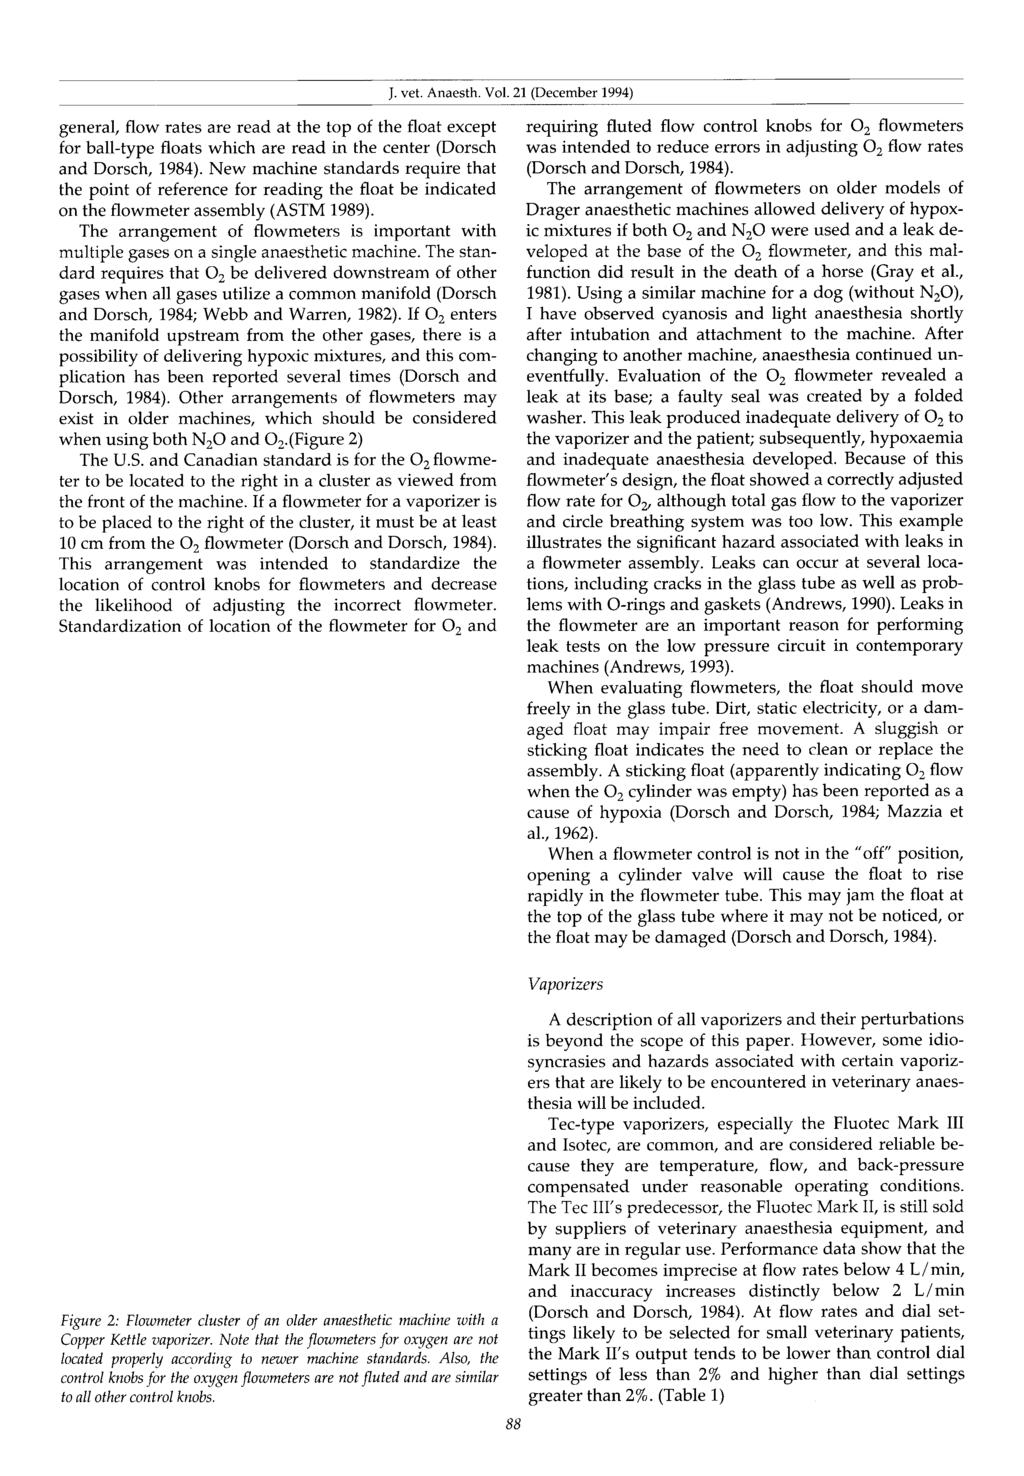 J. vet. Anaesth. Vol. 21 (December 1994) general, flow rates are read at the top of the float except for ball-type floats which are read in the center (Dorsch and Dorsch, 1984).